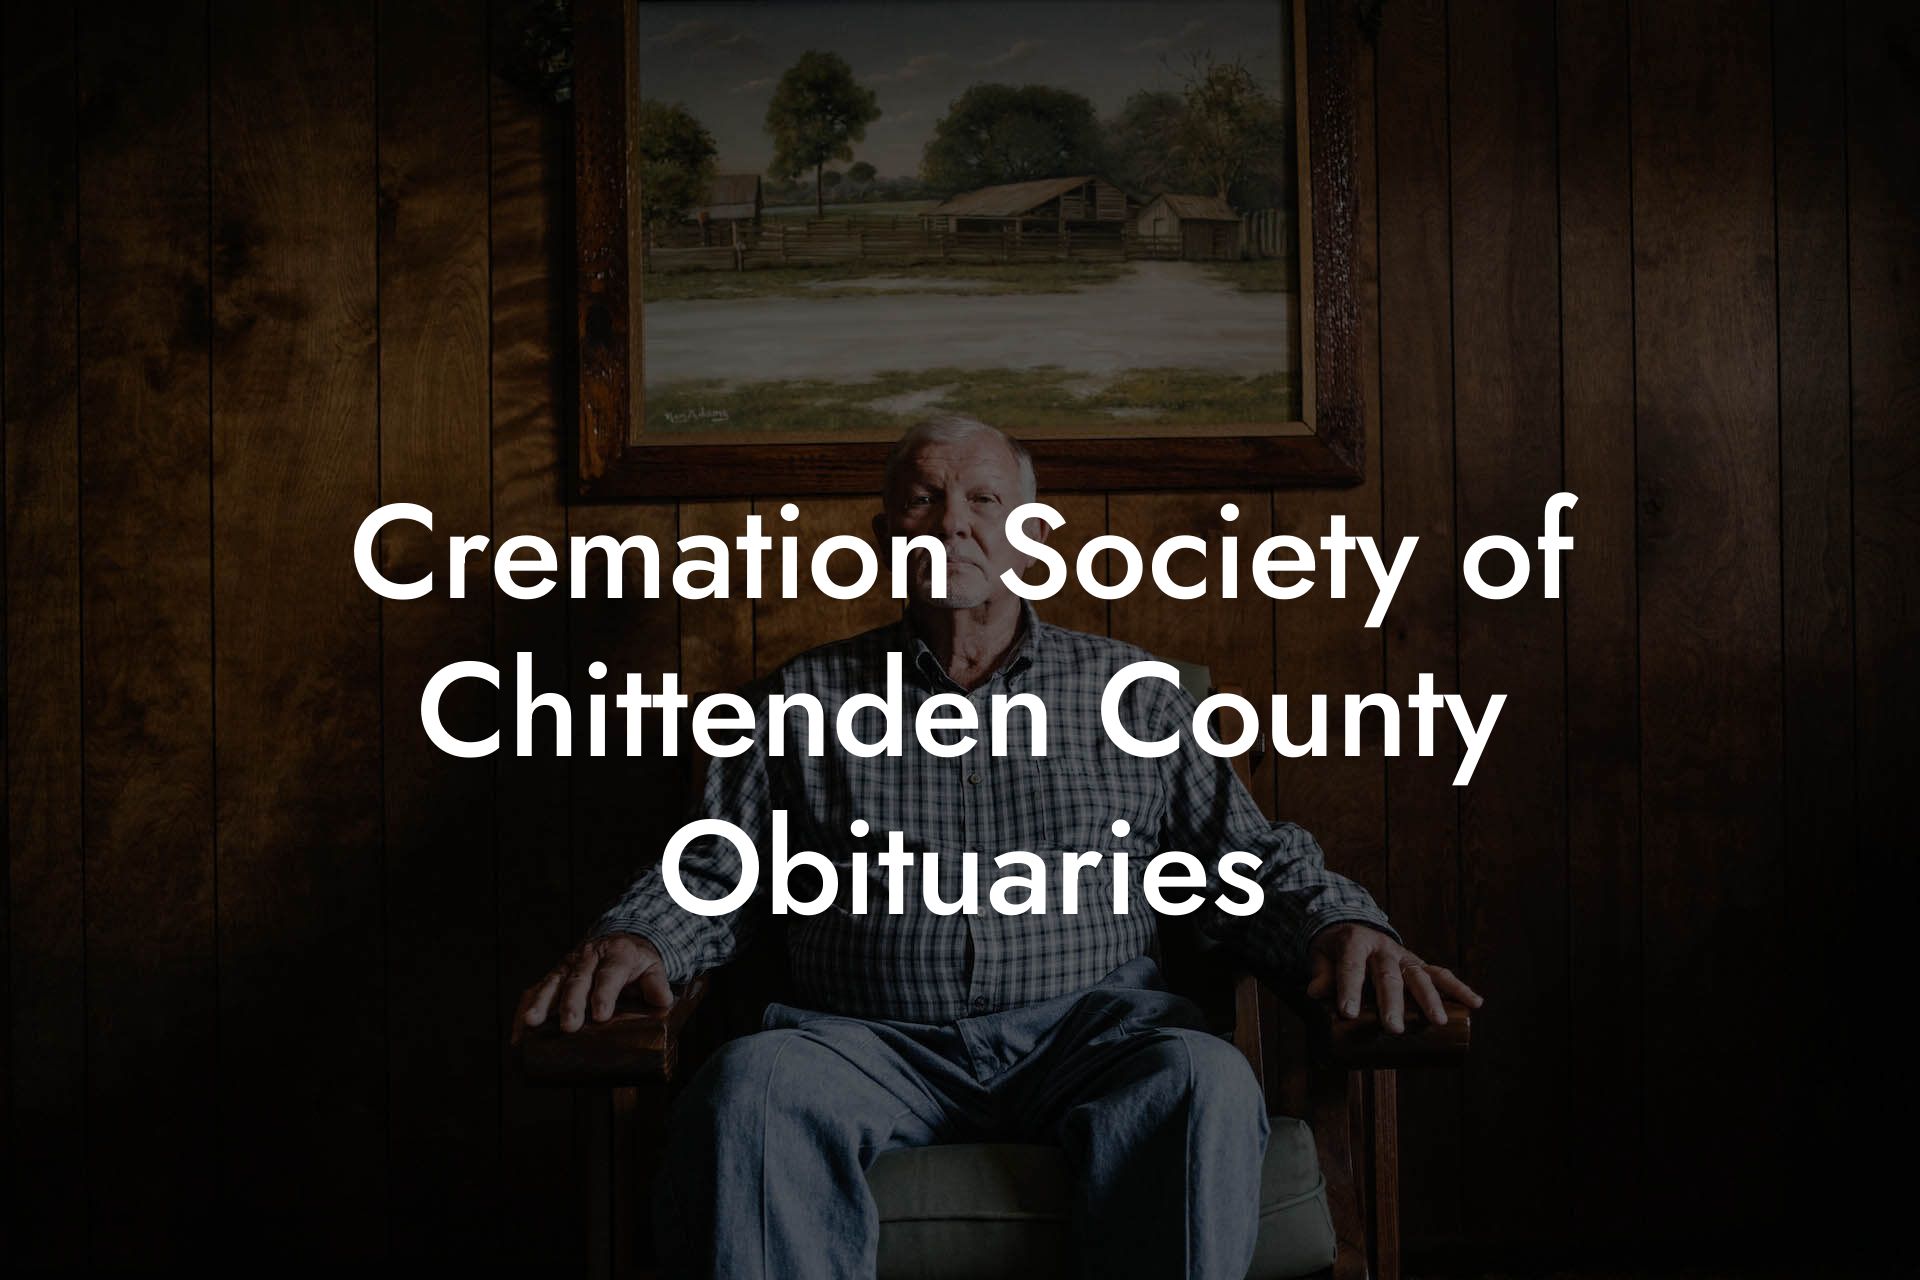 Cremation Society of Chittenden County Obituaries